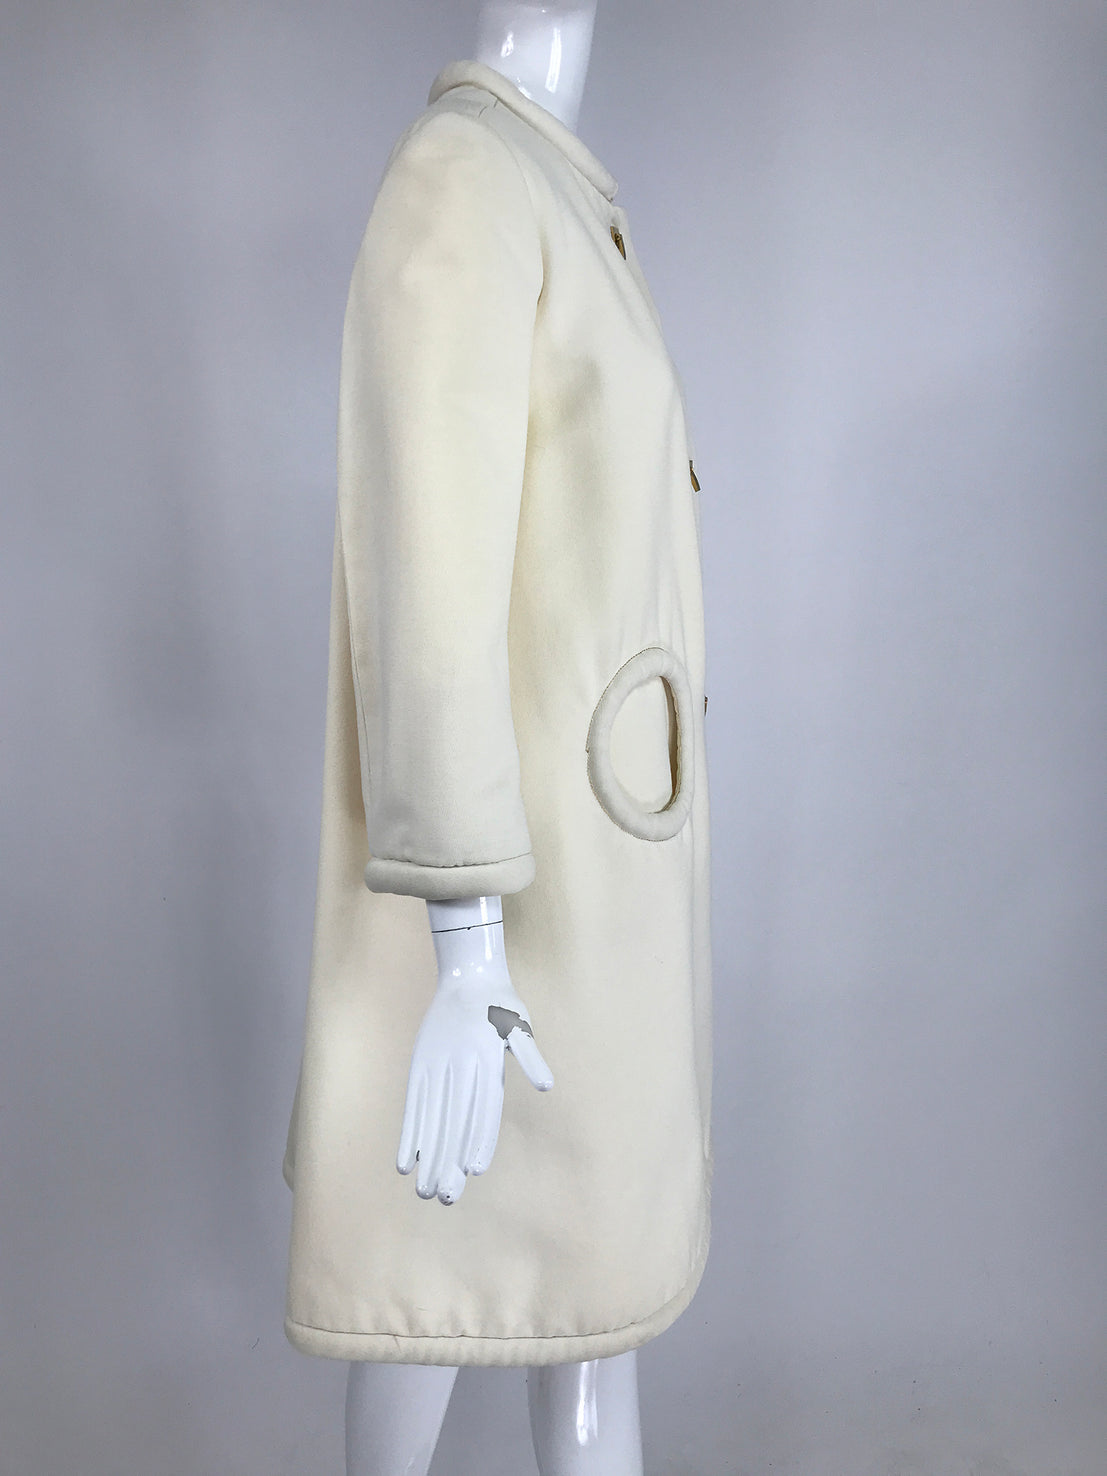 Off Pierre Wool – Beach with Metal Palm Vintage Circl Toggle Coat 1960s White Cardin Clasps